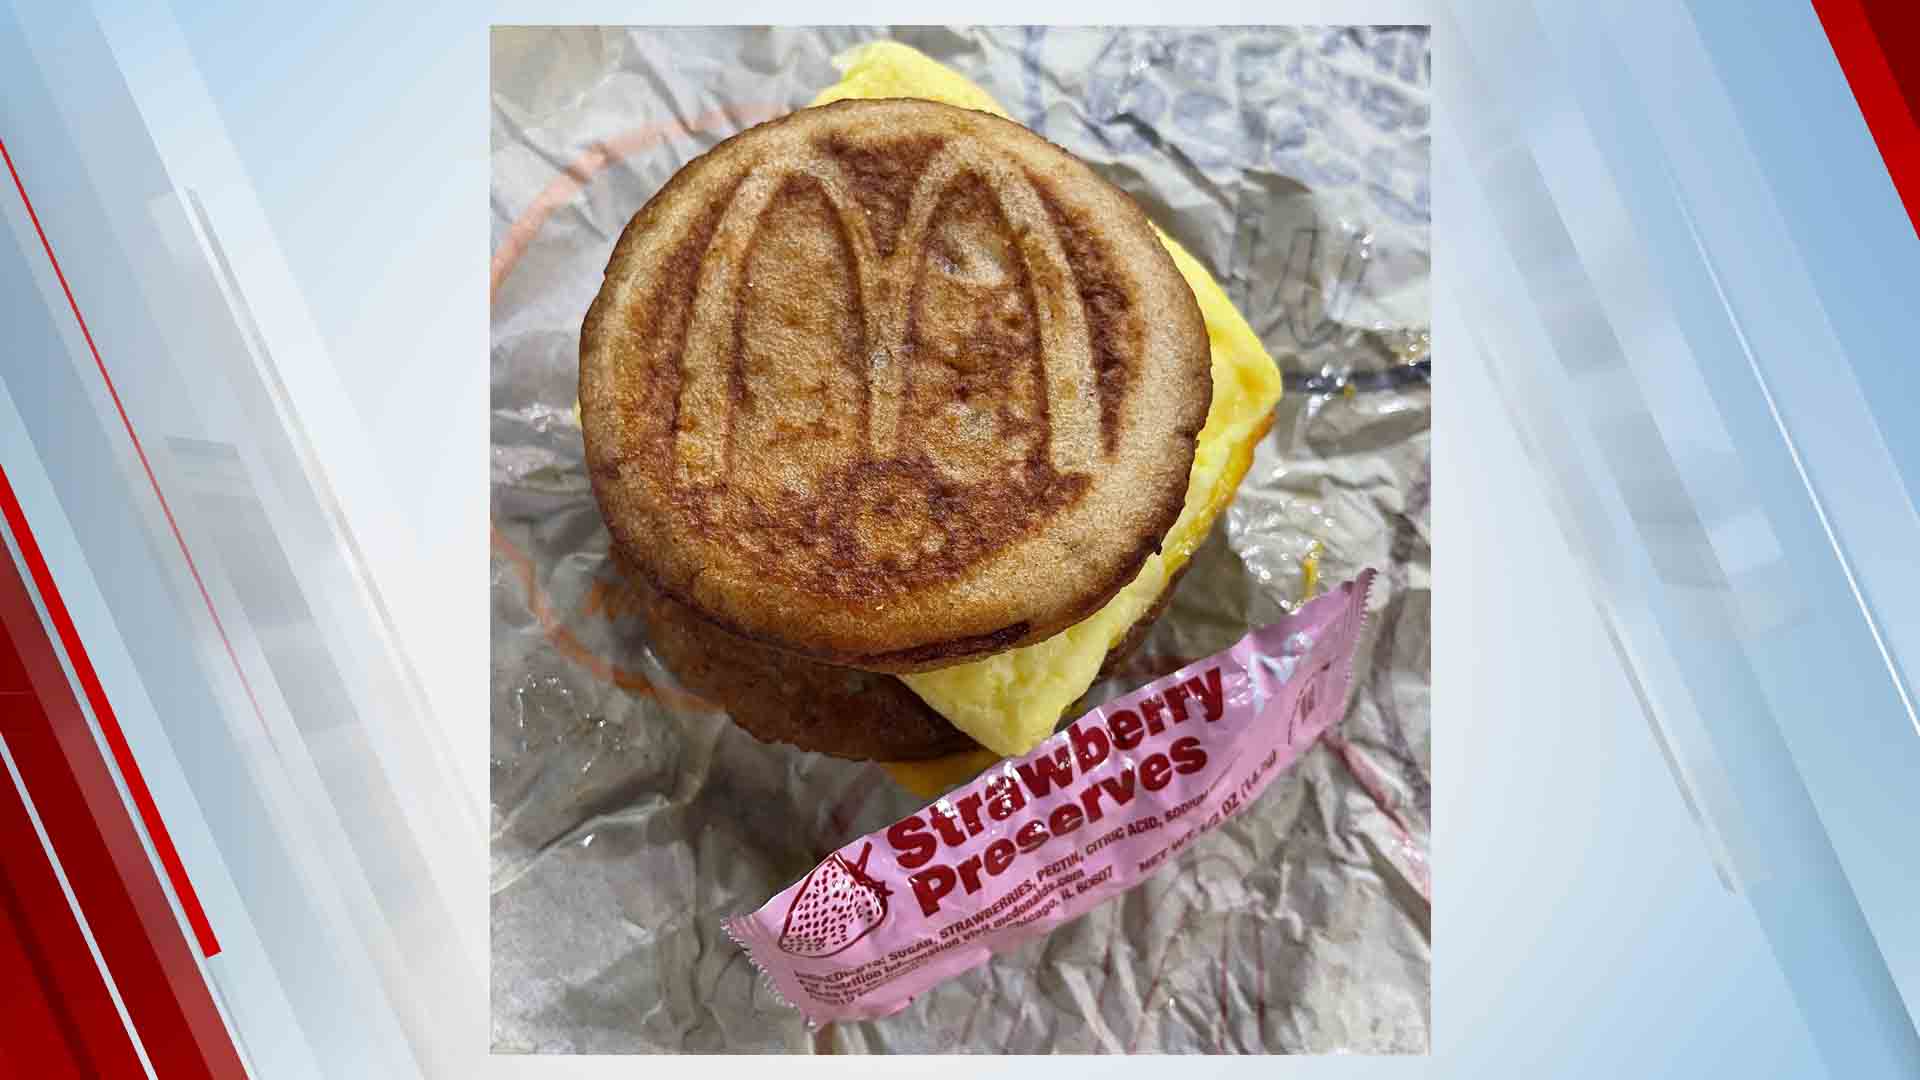 Taste Test Tuesday: McGriddle With Jelly